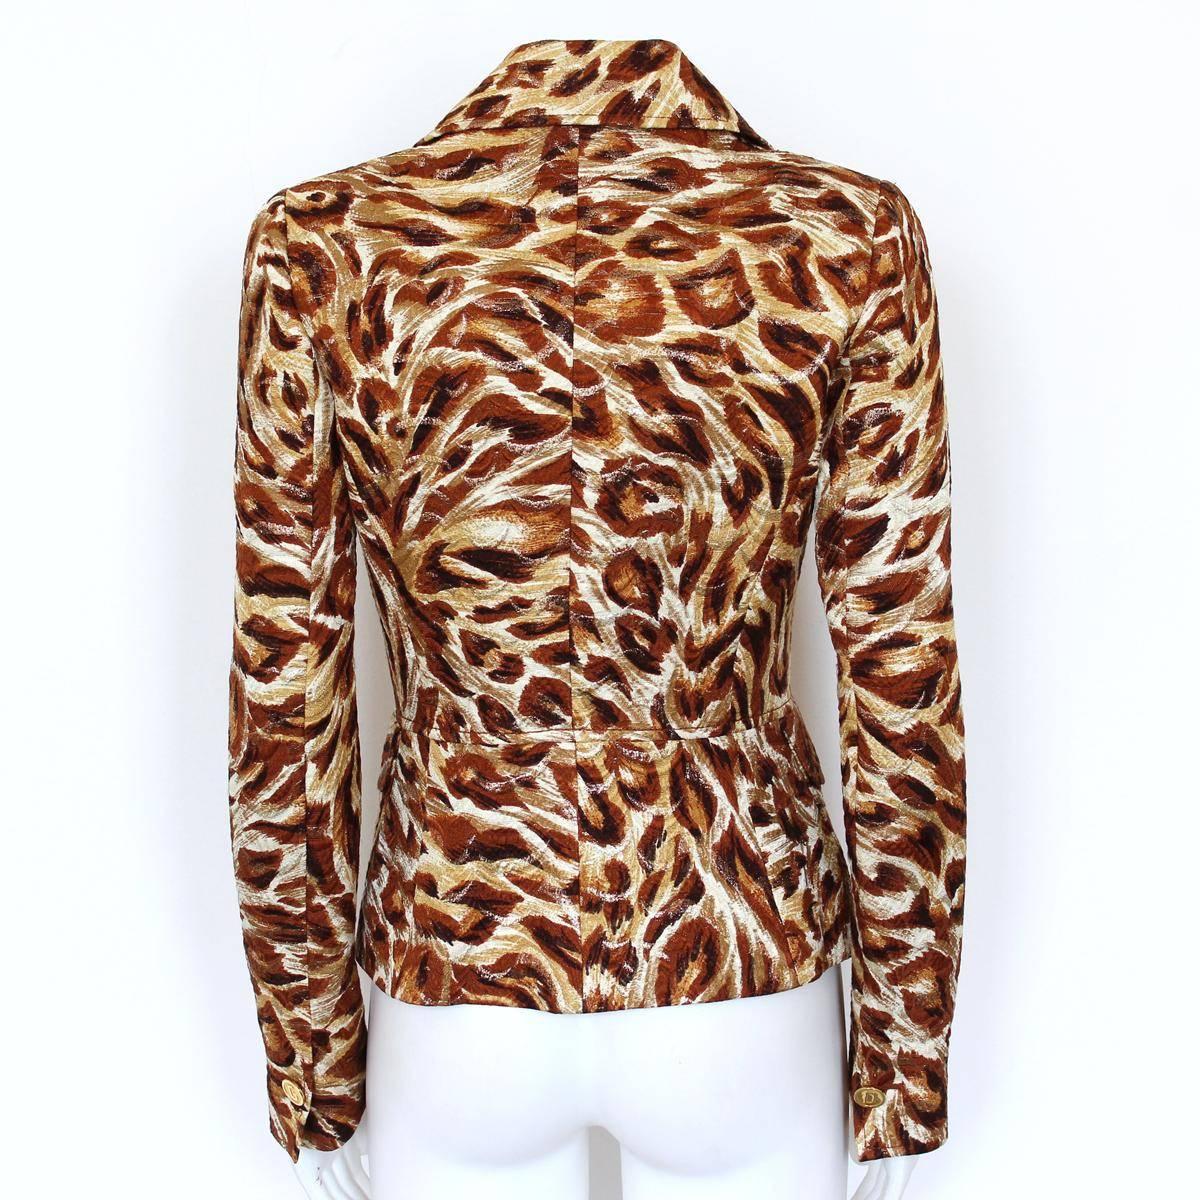 Magnificent Dolce & Gabbana jacket
DG Special Piece
Embossed silk
Multicolored pattern with golden powder
Golden DG buttons
Two pockets
Length shoulder / hem cm 52 (20.4 inches)
Original price € 3500
Worldwide express shipping included in the price !